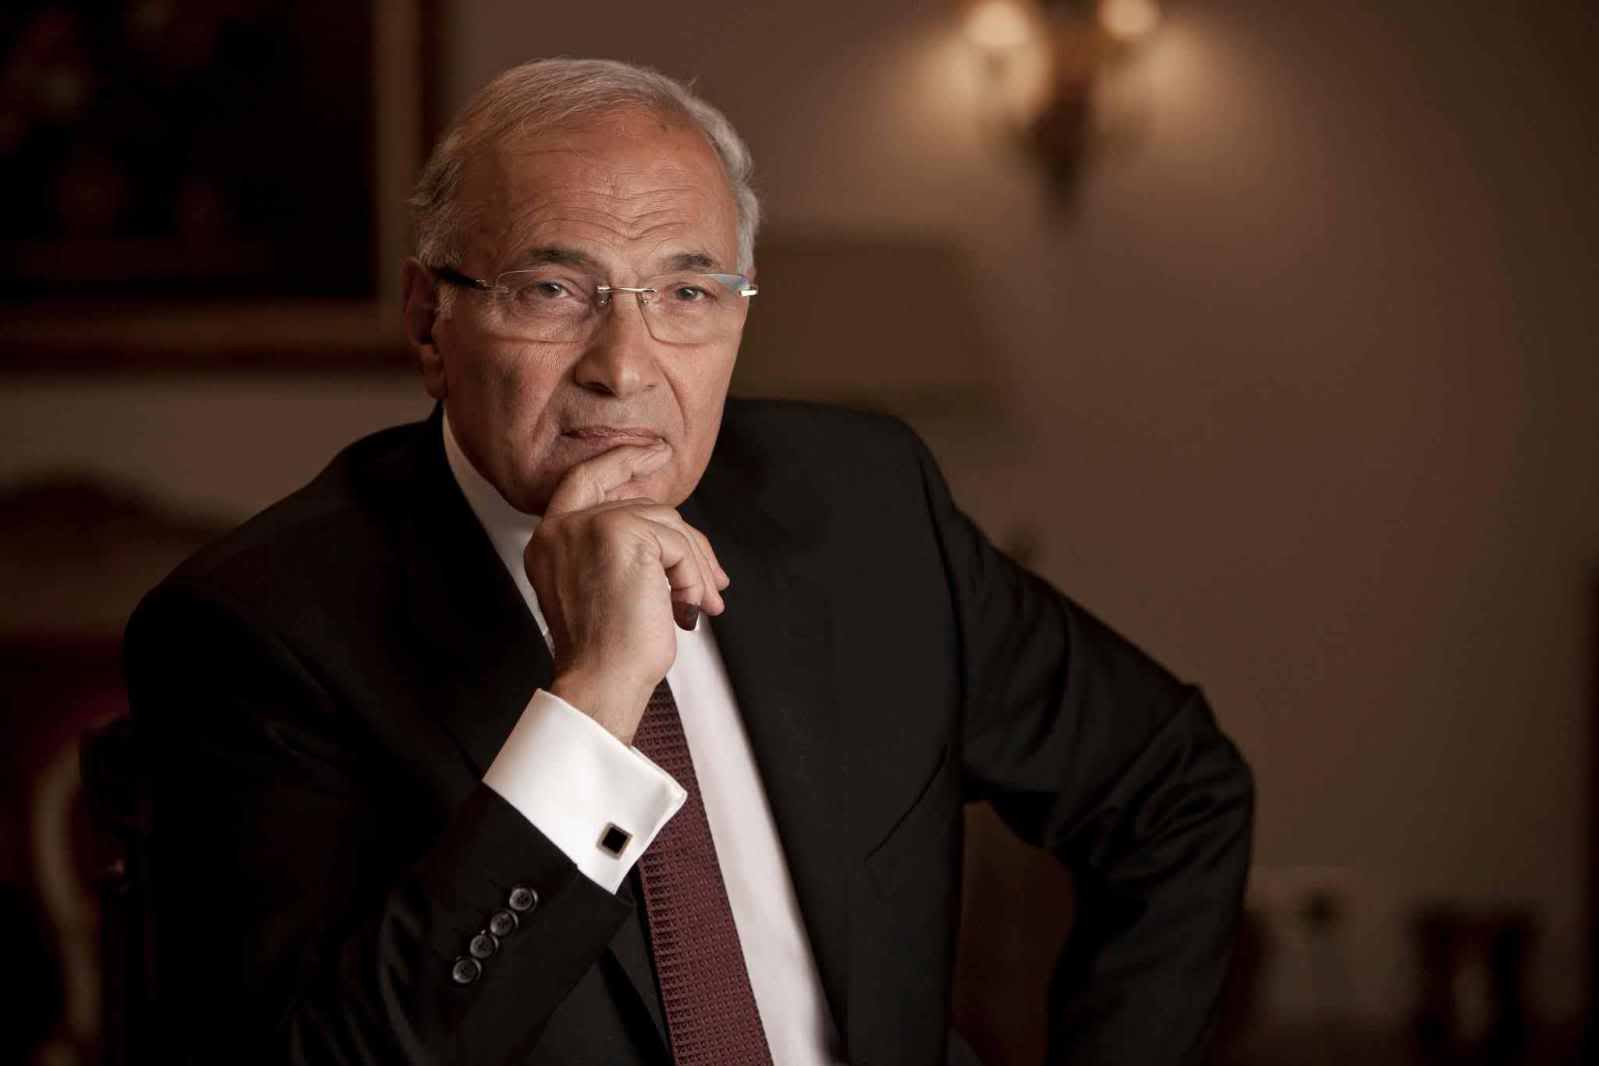 Ahmed Shafiq will not run for 2018 presidential elections - sources say